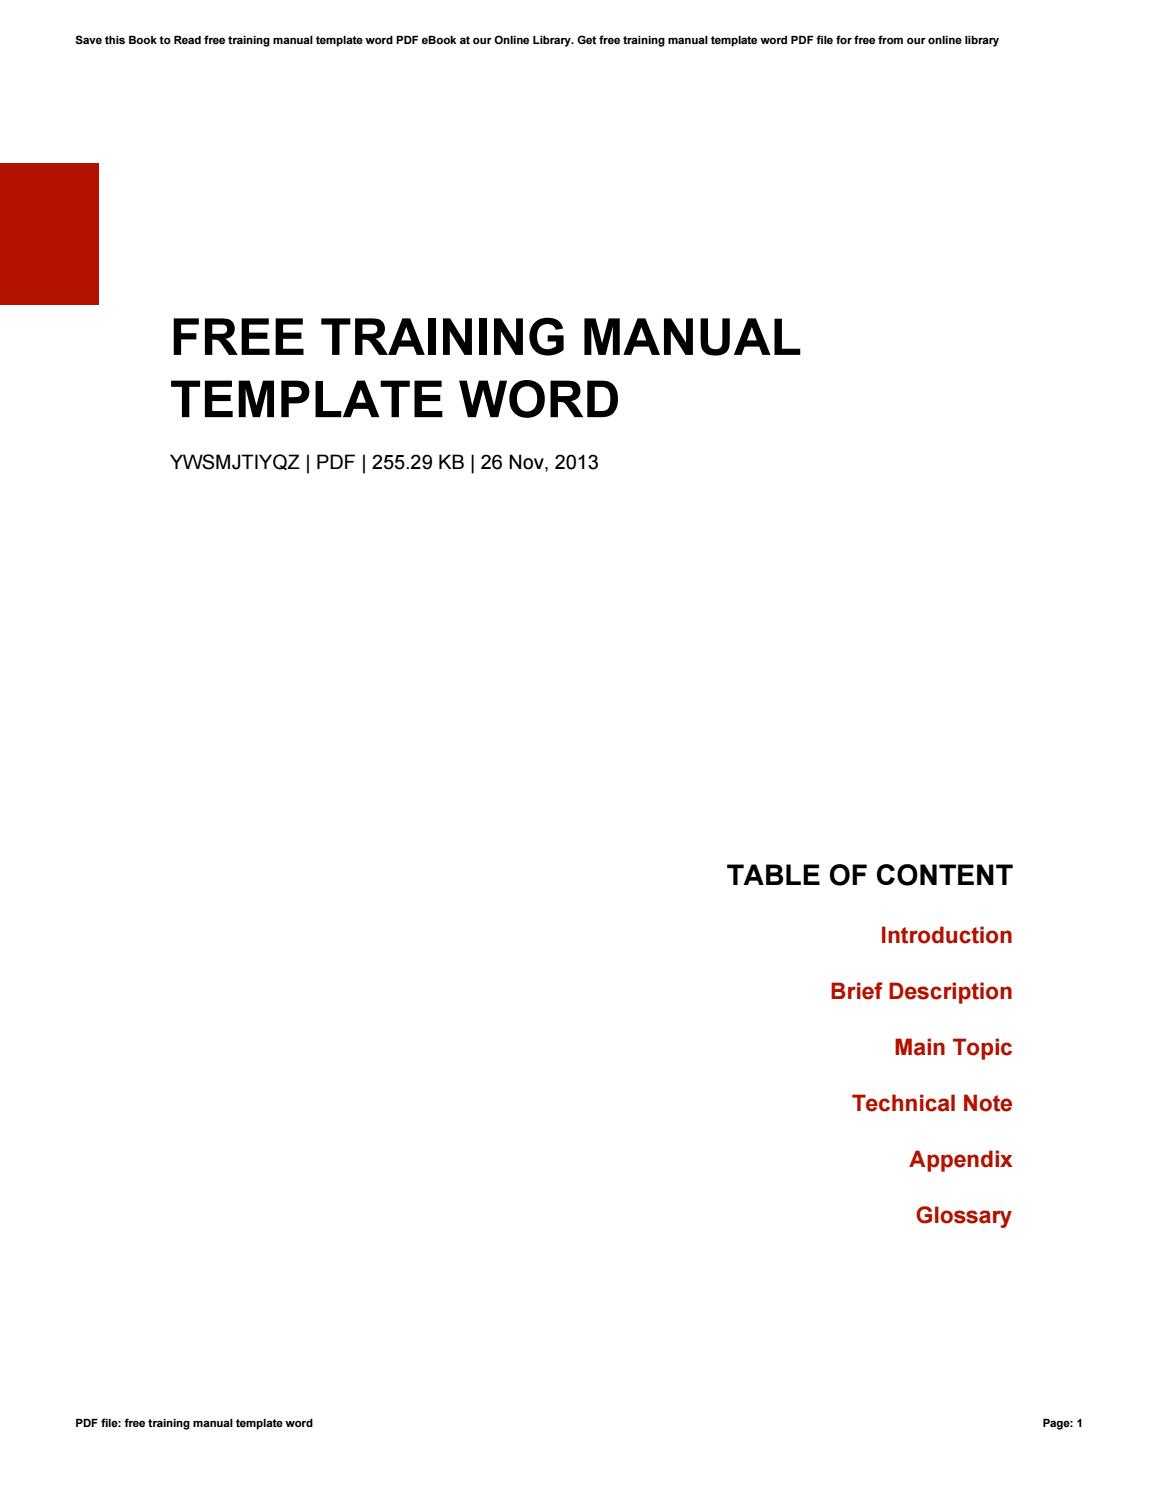 003 Training Manual Template Word Ideas Page 1 Fascinating With Regard To Training Documentation Template Word